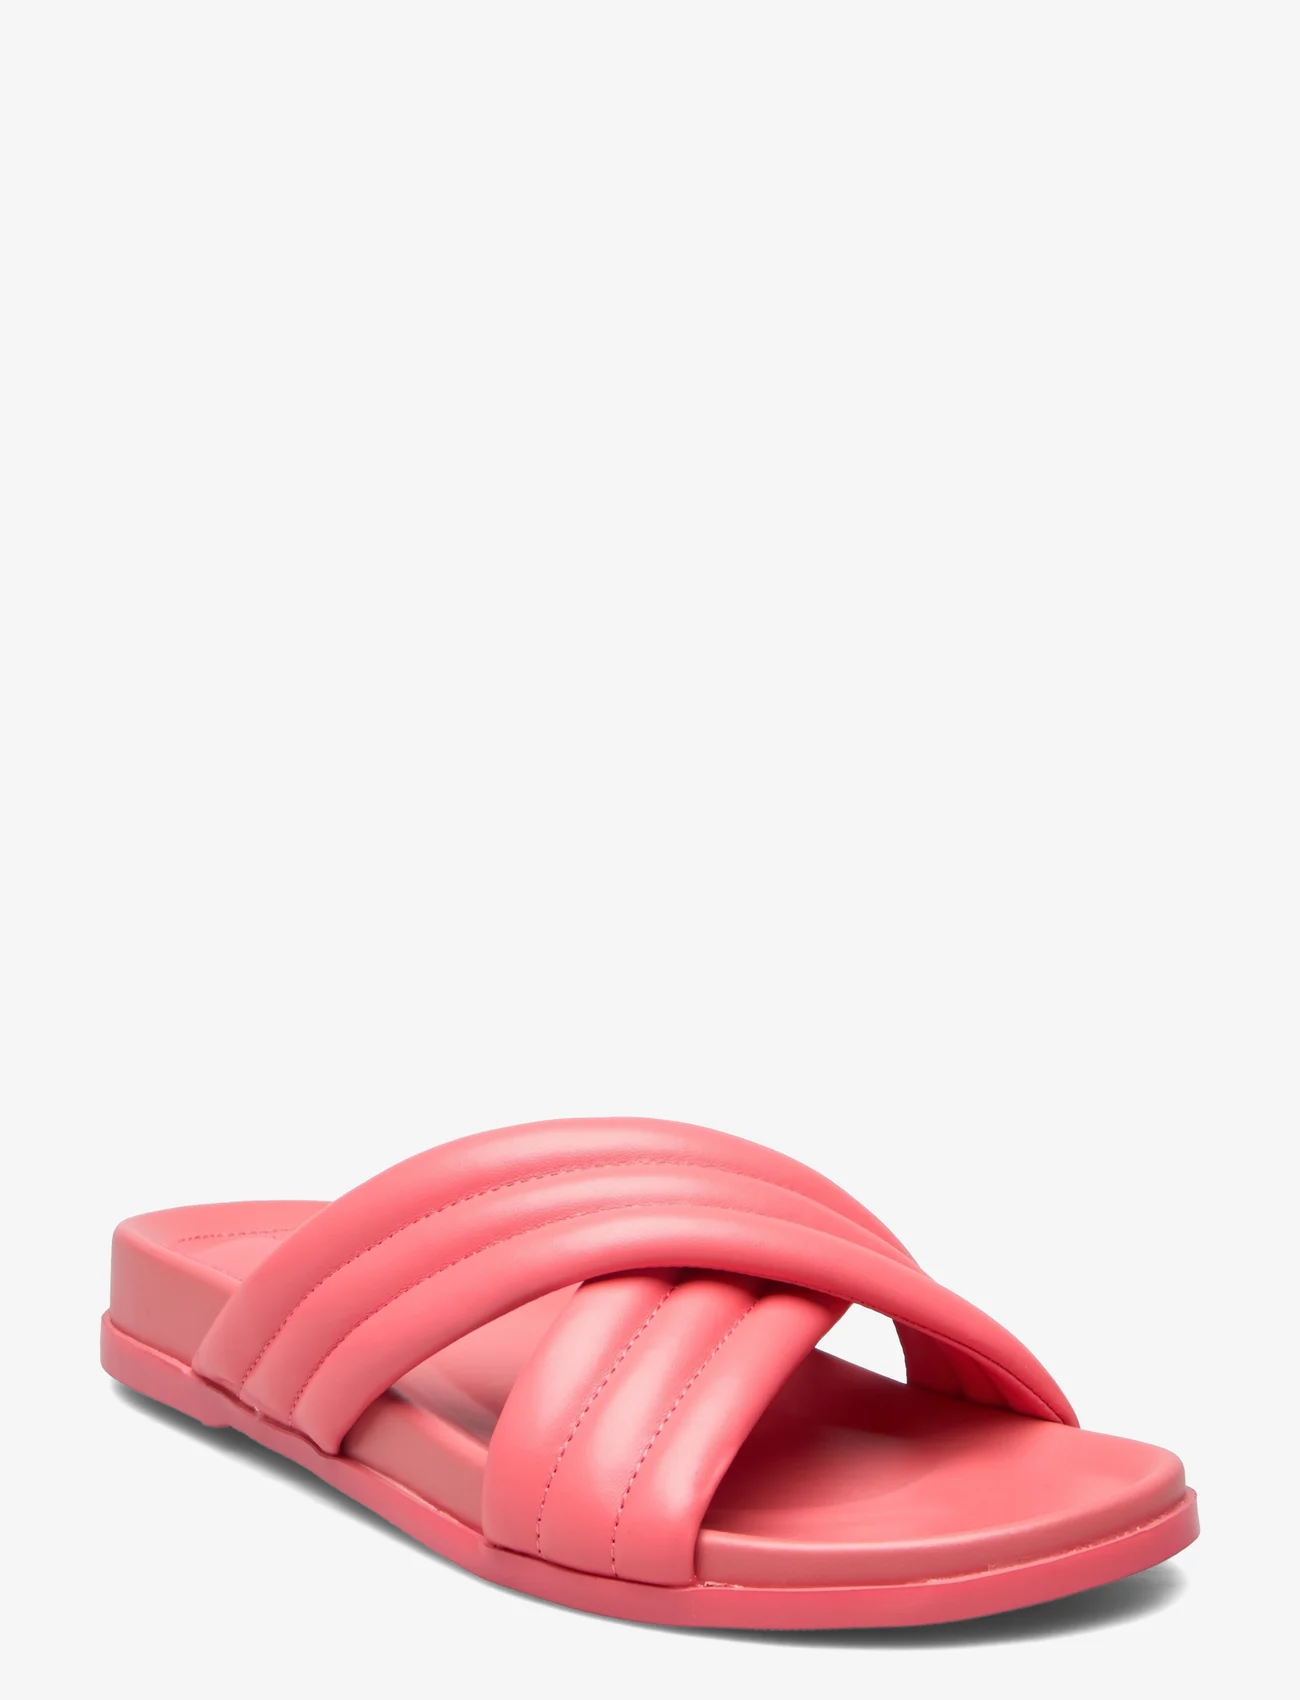 Sofie Schnoor Baby and Kids - Sandal - gode sommertilbud - coral pink - 0